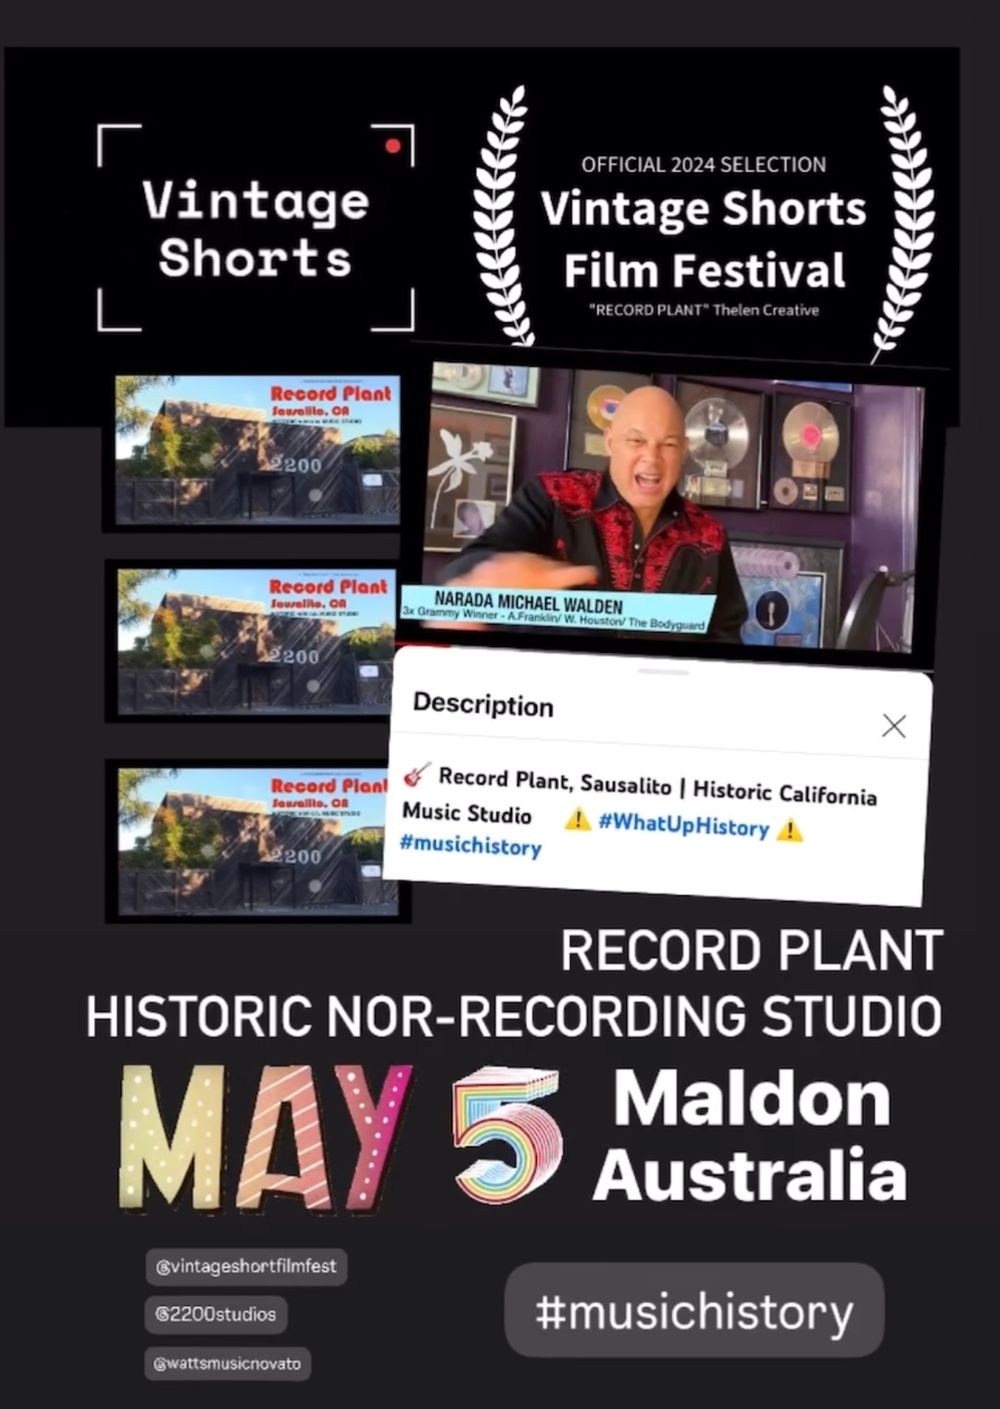 Short Music Doc Record Plant Recording Studio by Thelen Creative at Vintage Shorts Film Festival